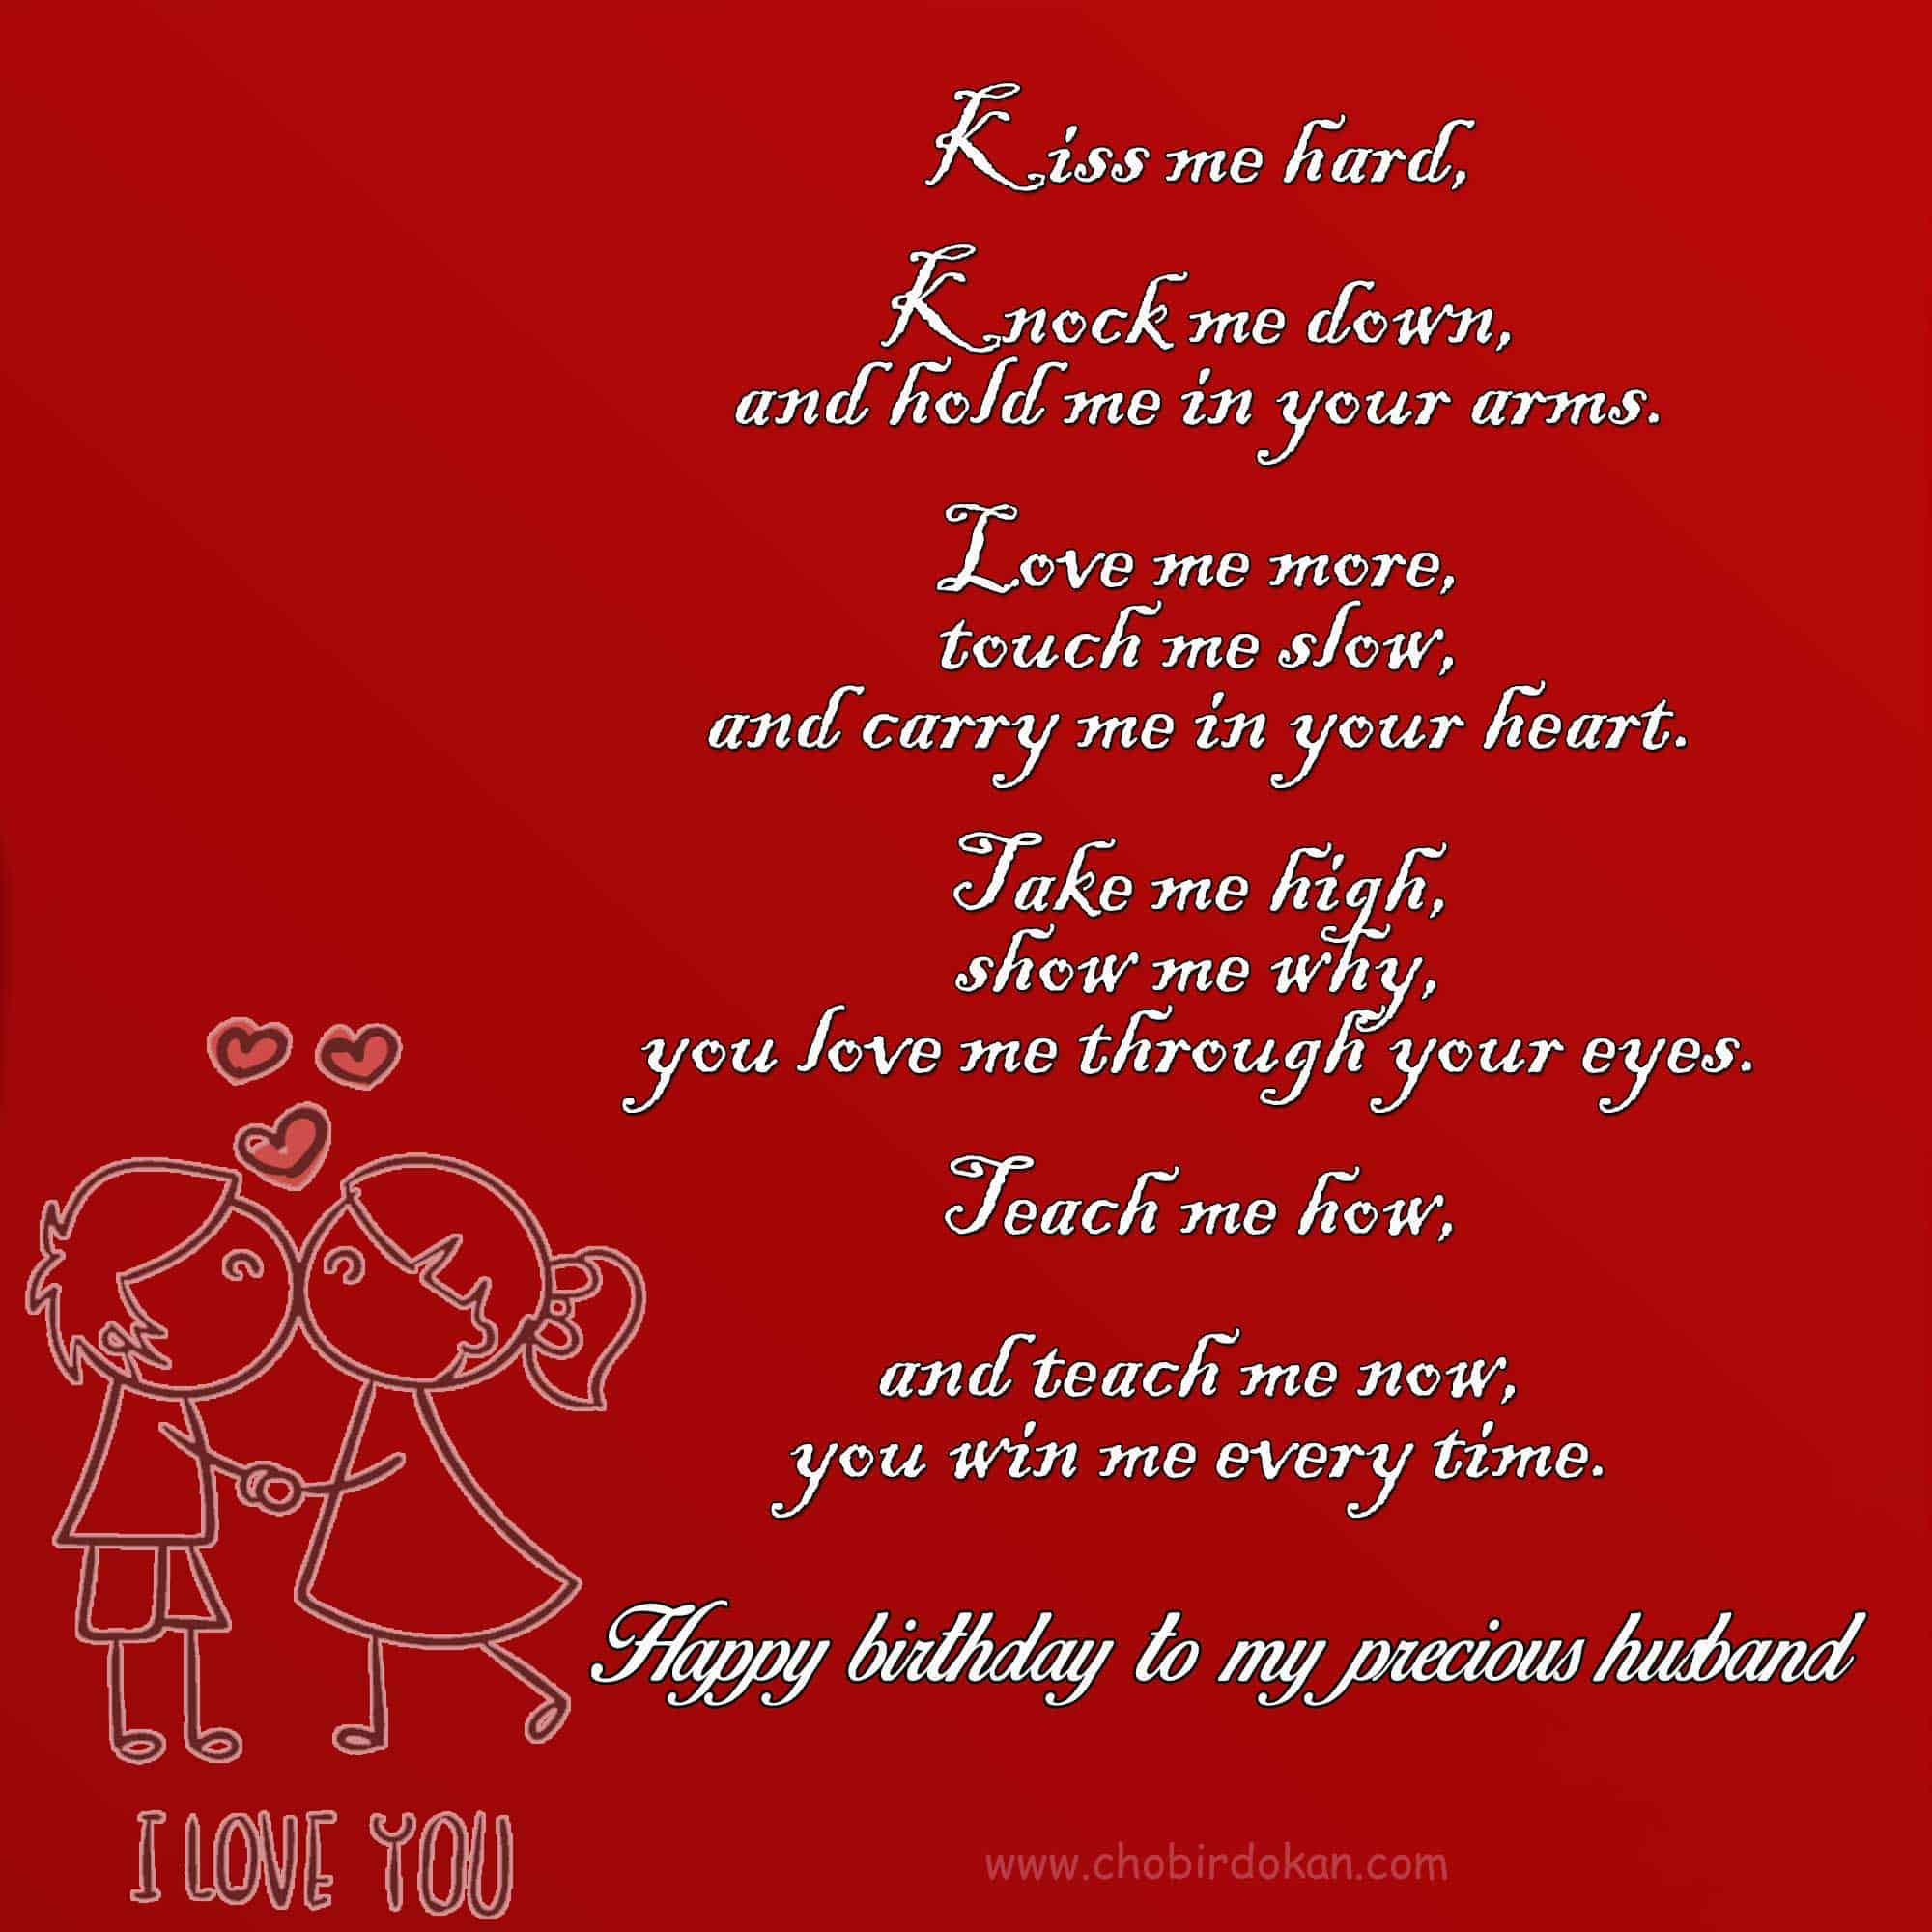 Happy Birthday Poems For Him Funny
 50 Happy Birthday For Him With Quotes iLove Messages